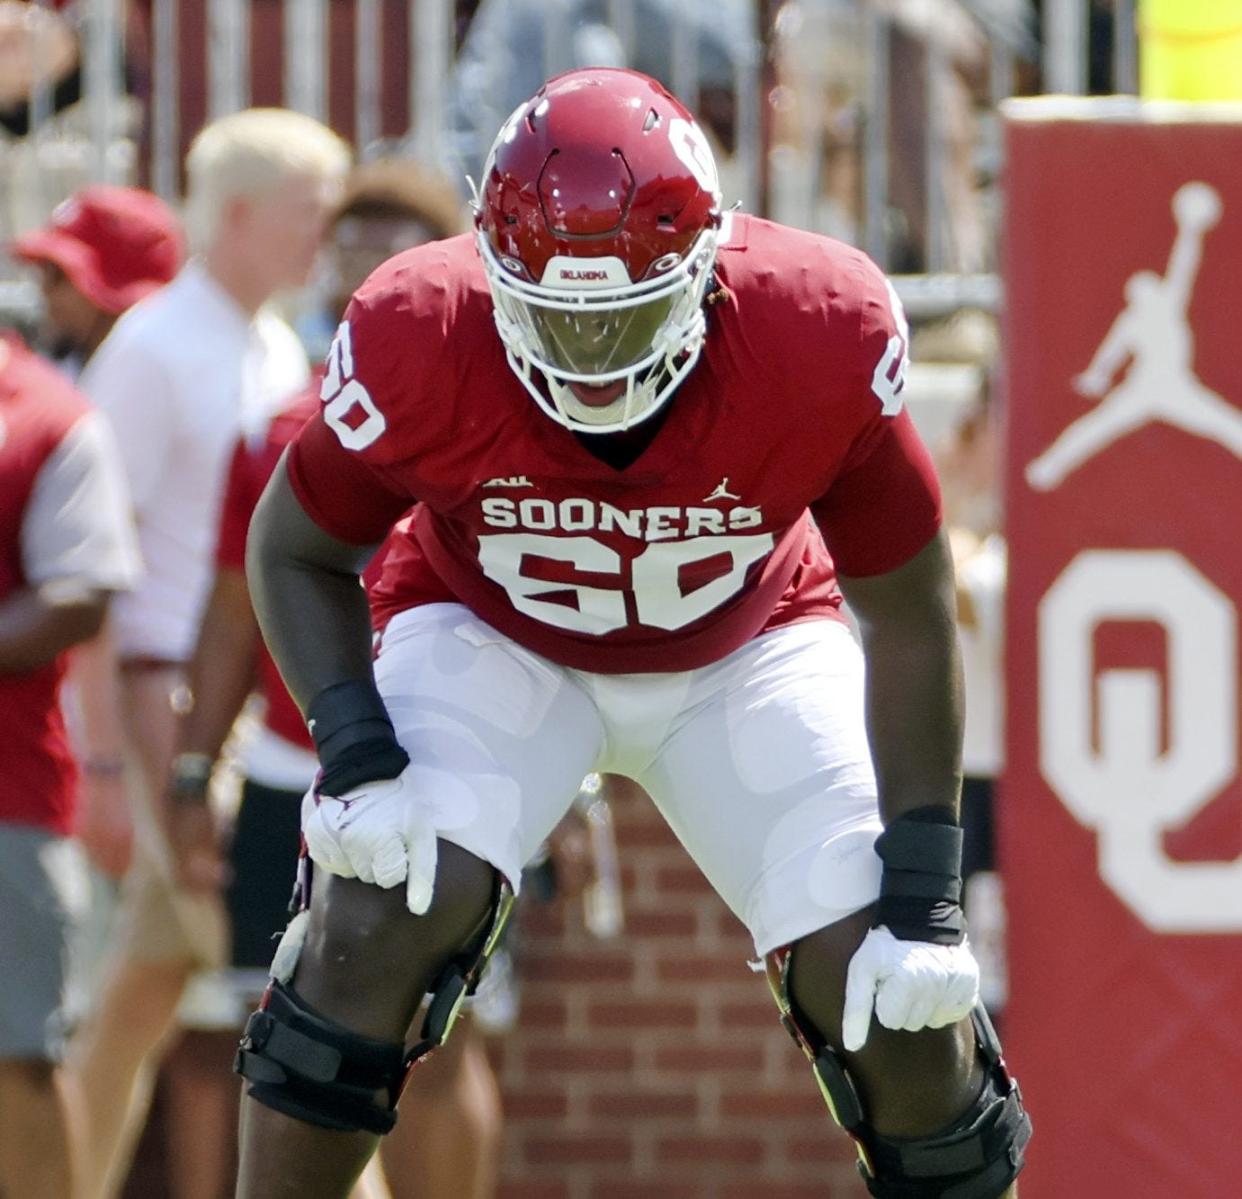 Oklahoma offensive tackle Tyler Guyton was drafted by the Dallas Cowboys in the first round and may end up being the starting left tackle as a rookie. Guyton is the second straight former Manor High School football player to go in the last two drafts.